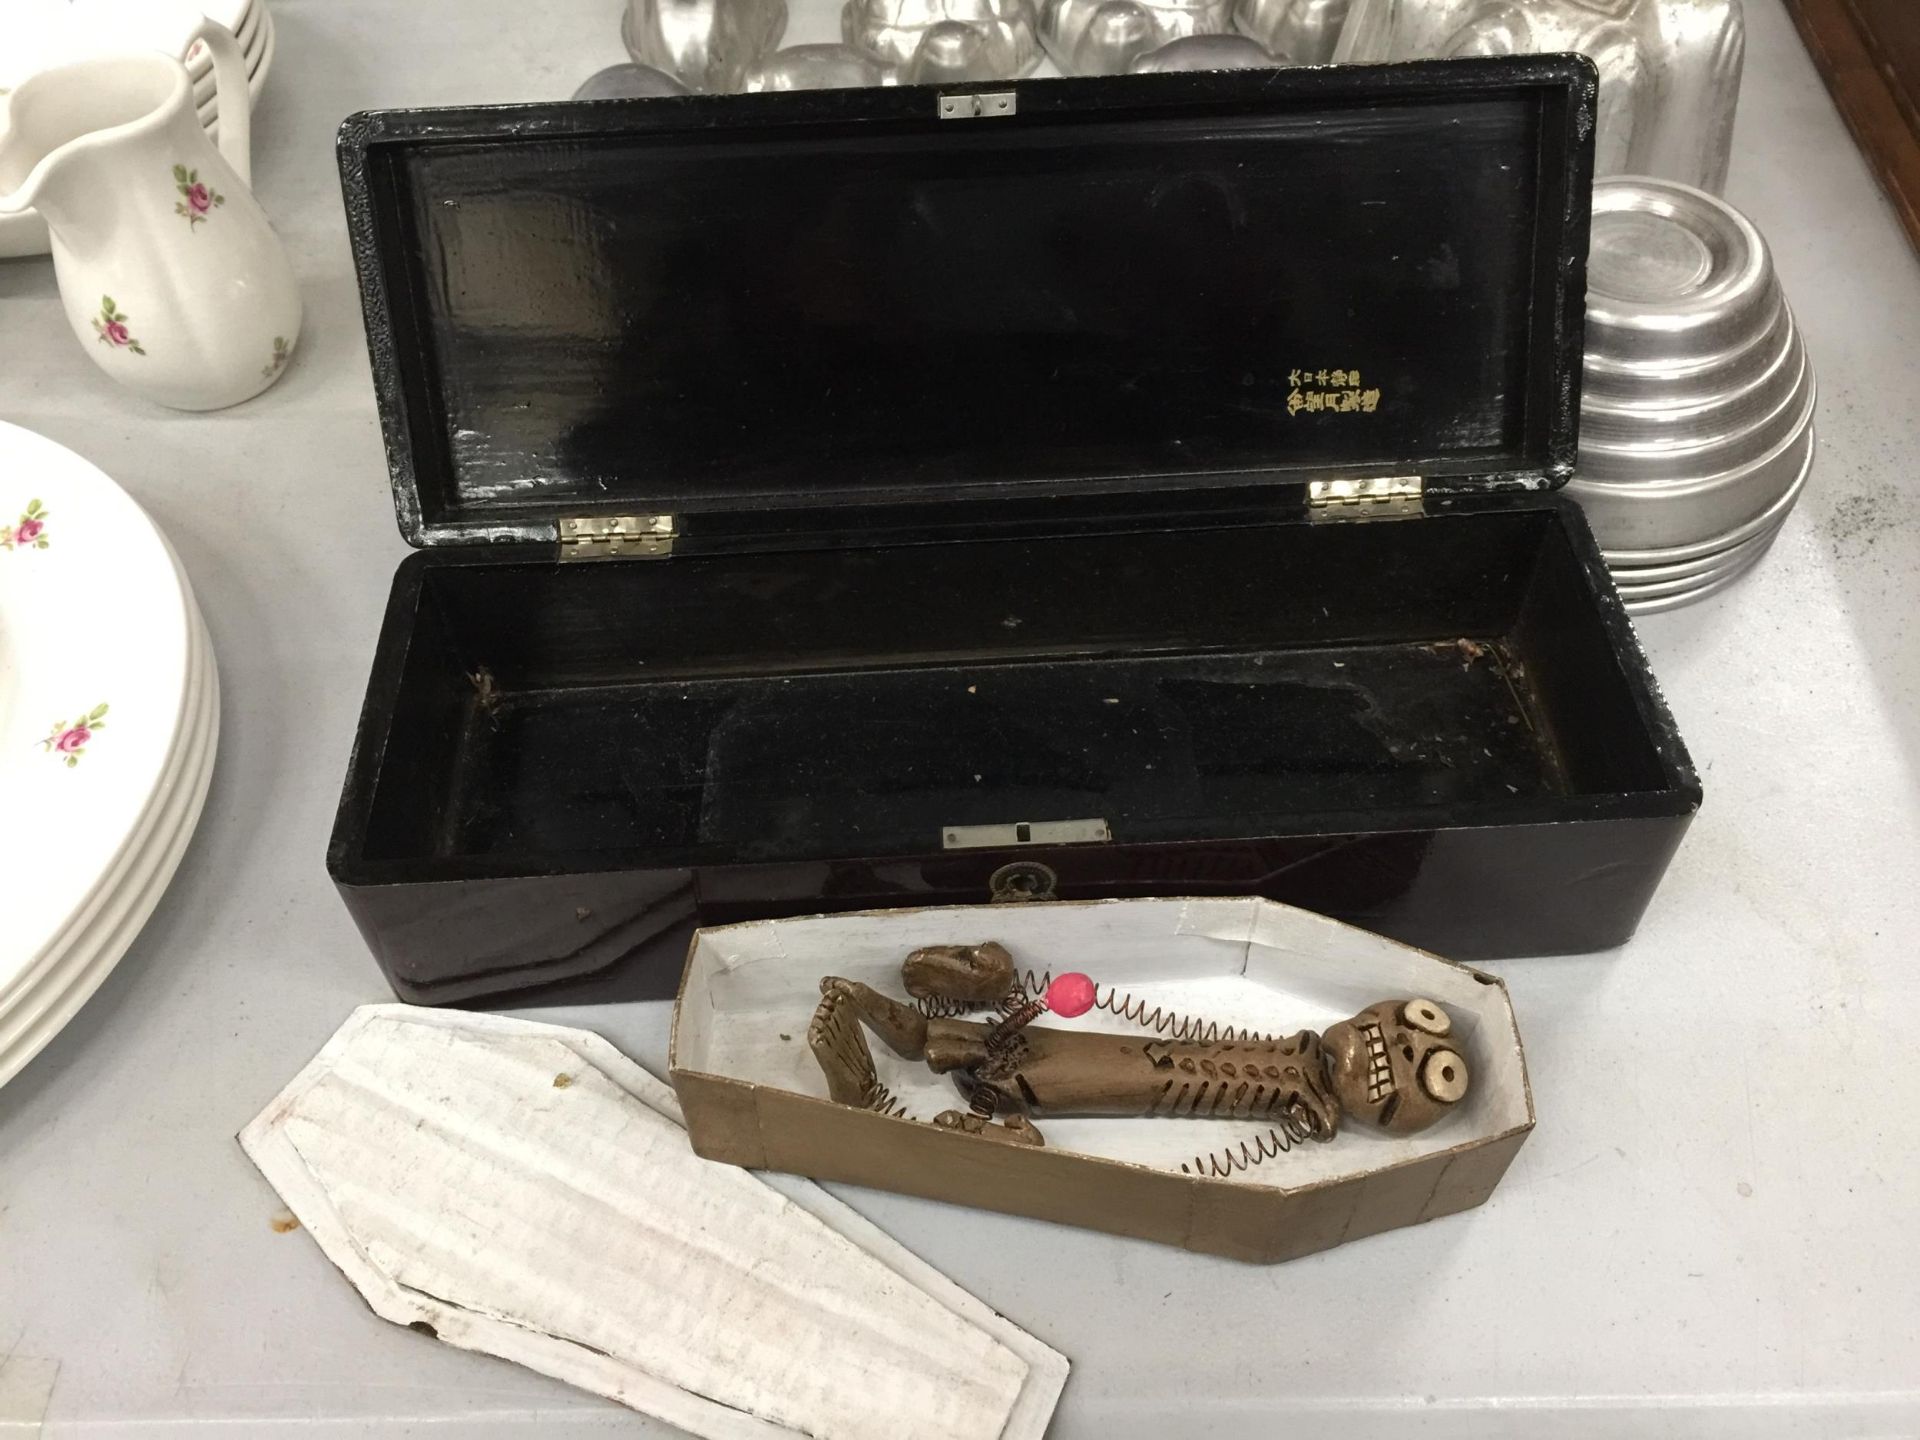 AN ORIENTAL STYLE LACQUERED GLOVE BOX PLUS A VOODOO FERTILITY DOLL IN A COFFIN - Image 2 of 2